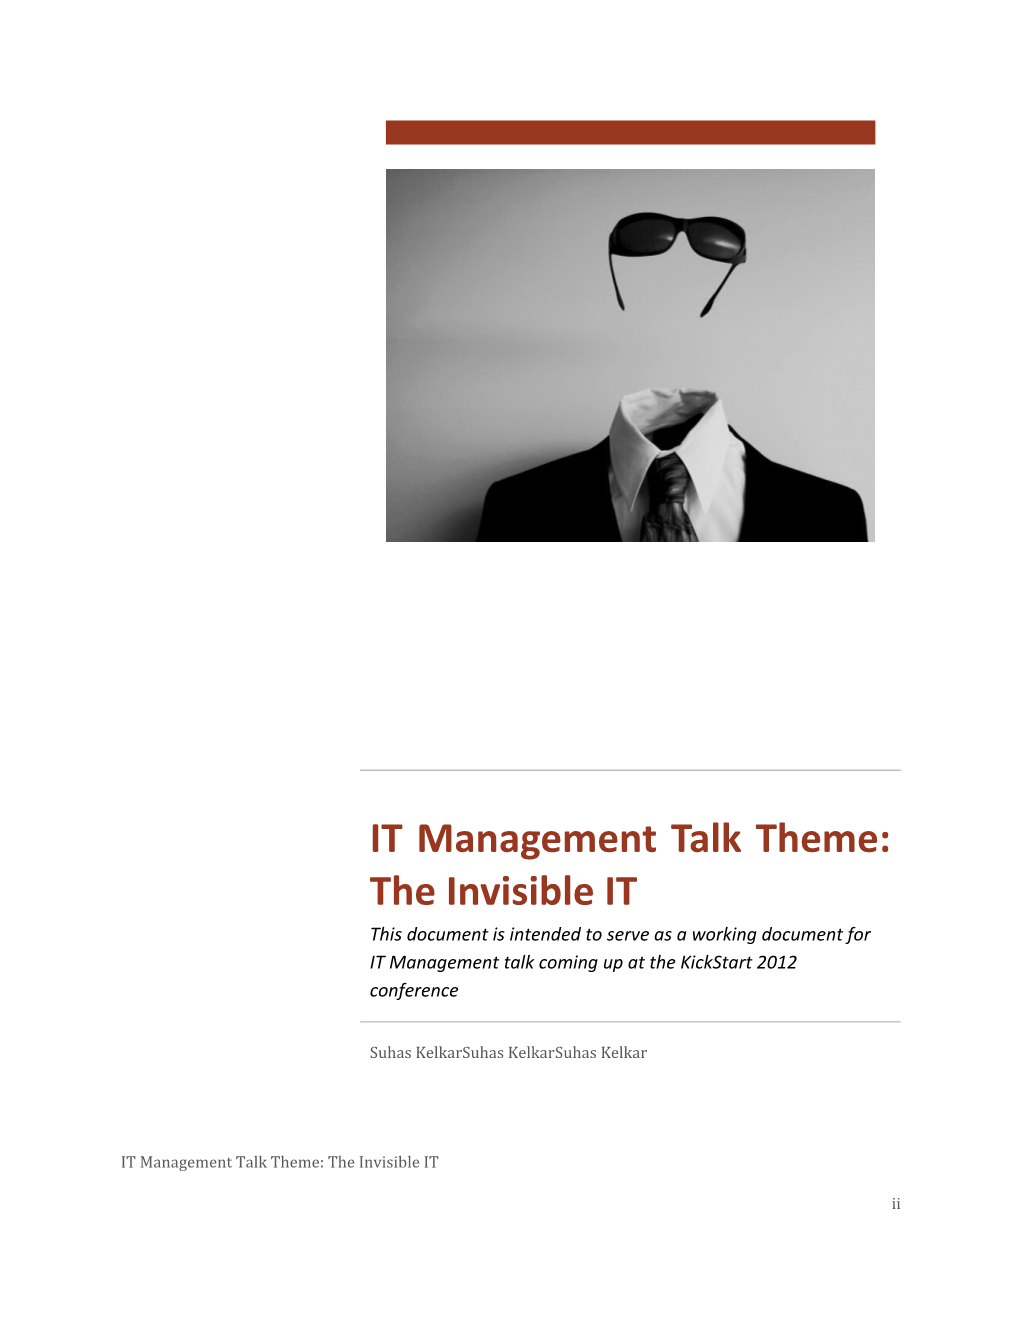 IT Management Talk Theme: the Invisible IT